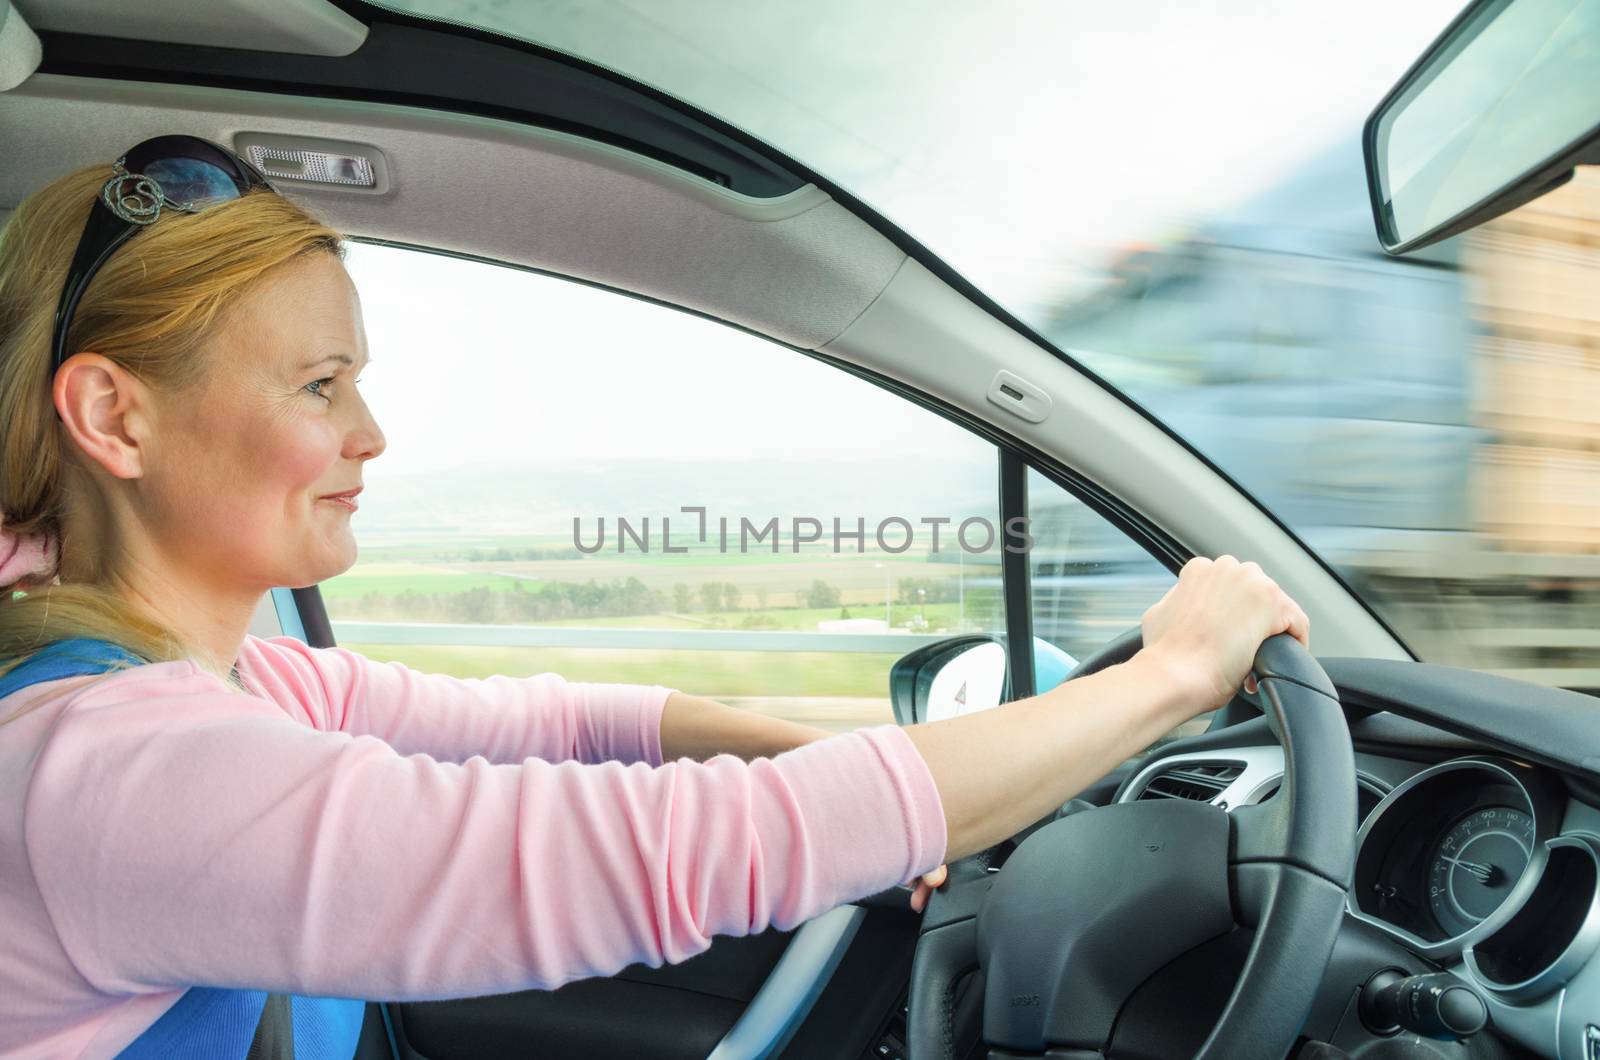 Attractive adult woman safe and carefully driving car on suburban road. Inside the auto photo with high speed oncoming lorry truck blurred in motion.